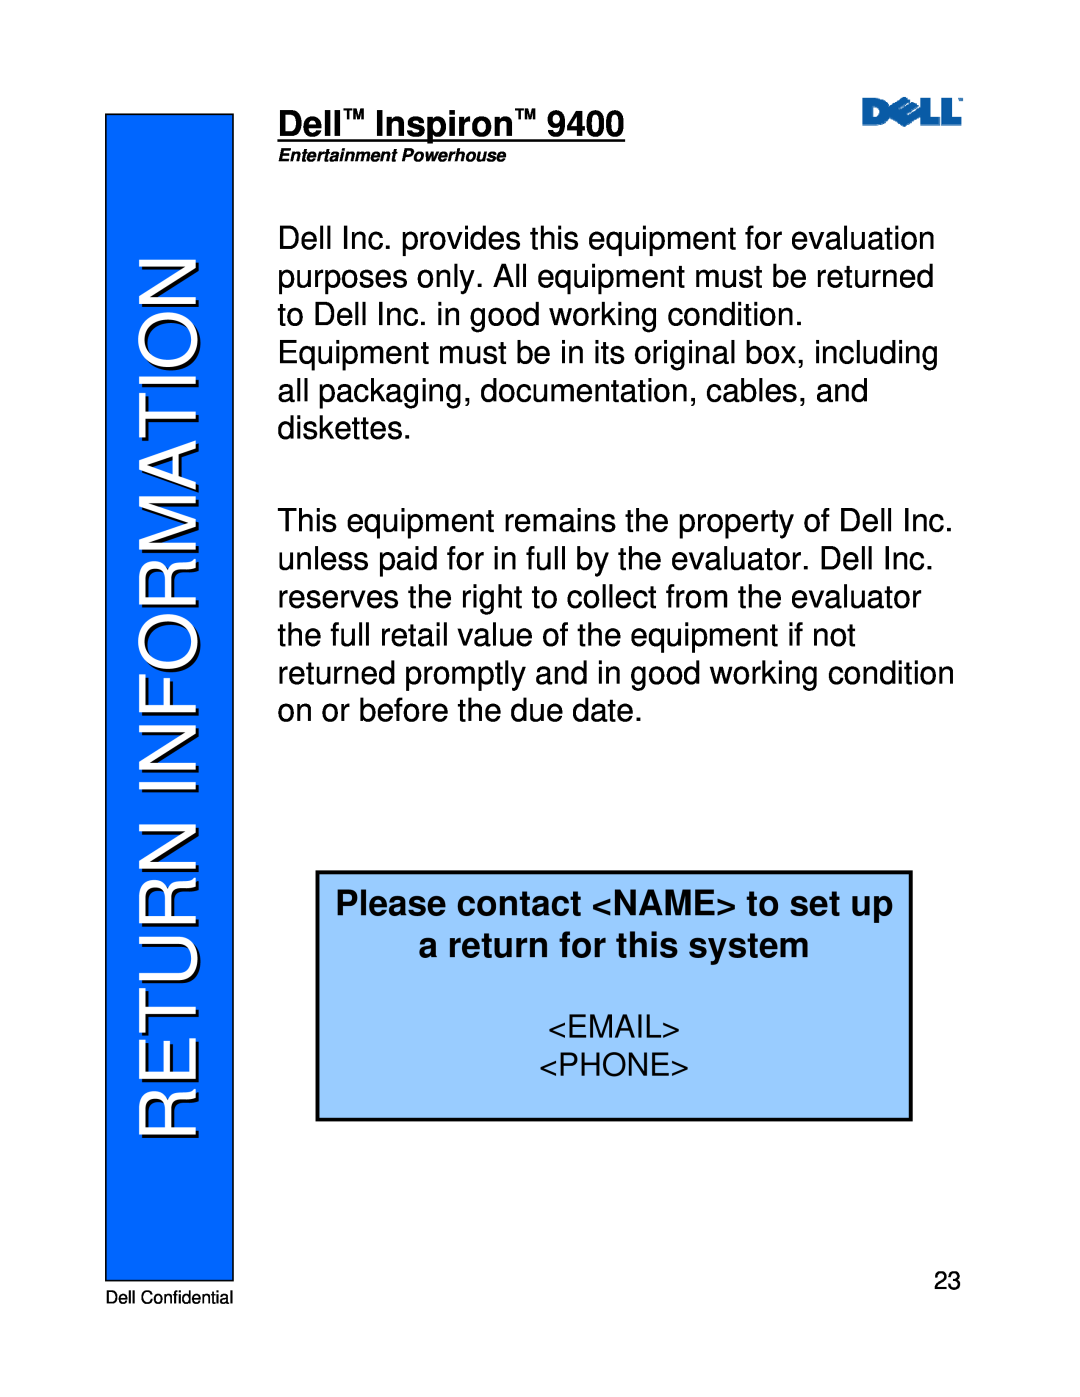 Dell 9400 manual Return Information, Please contact NAME to set up a return for this system, Dell Inspiron 